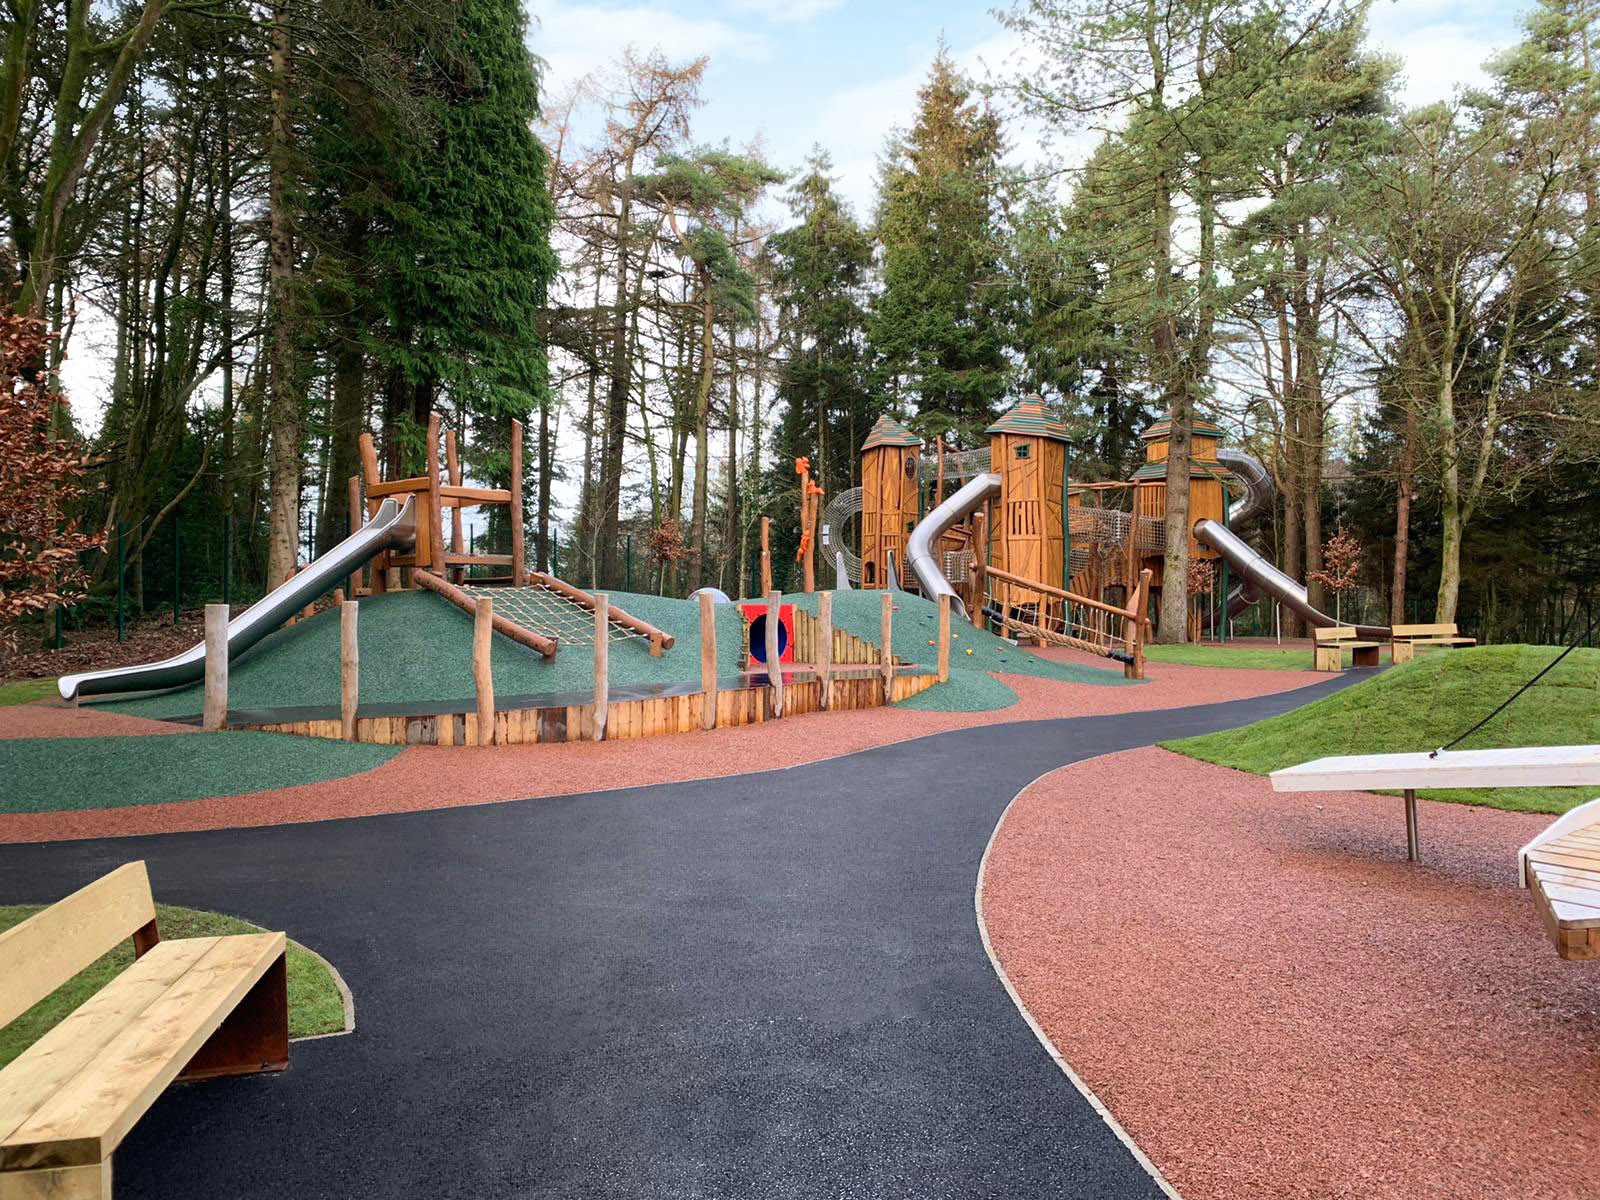 Pathway leading to multi tower play unit and trail mound